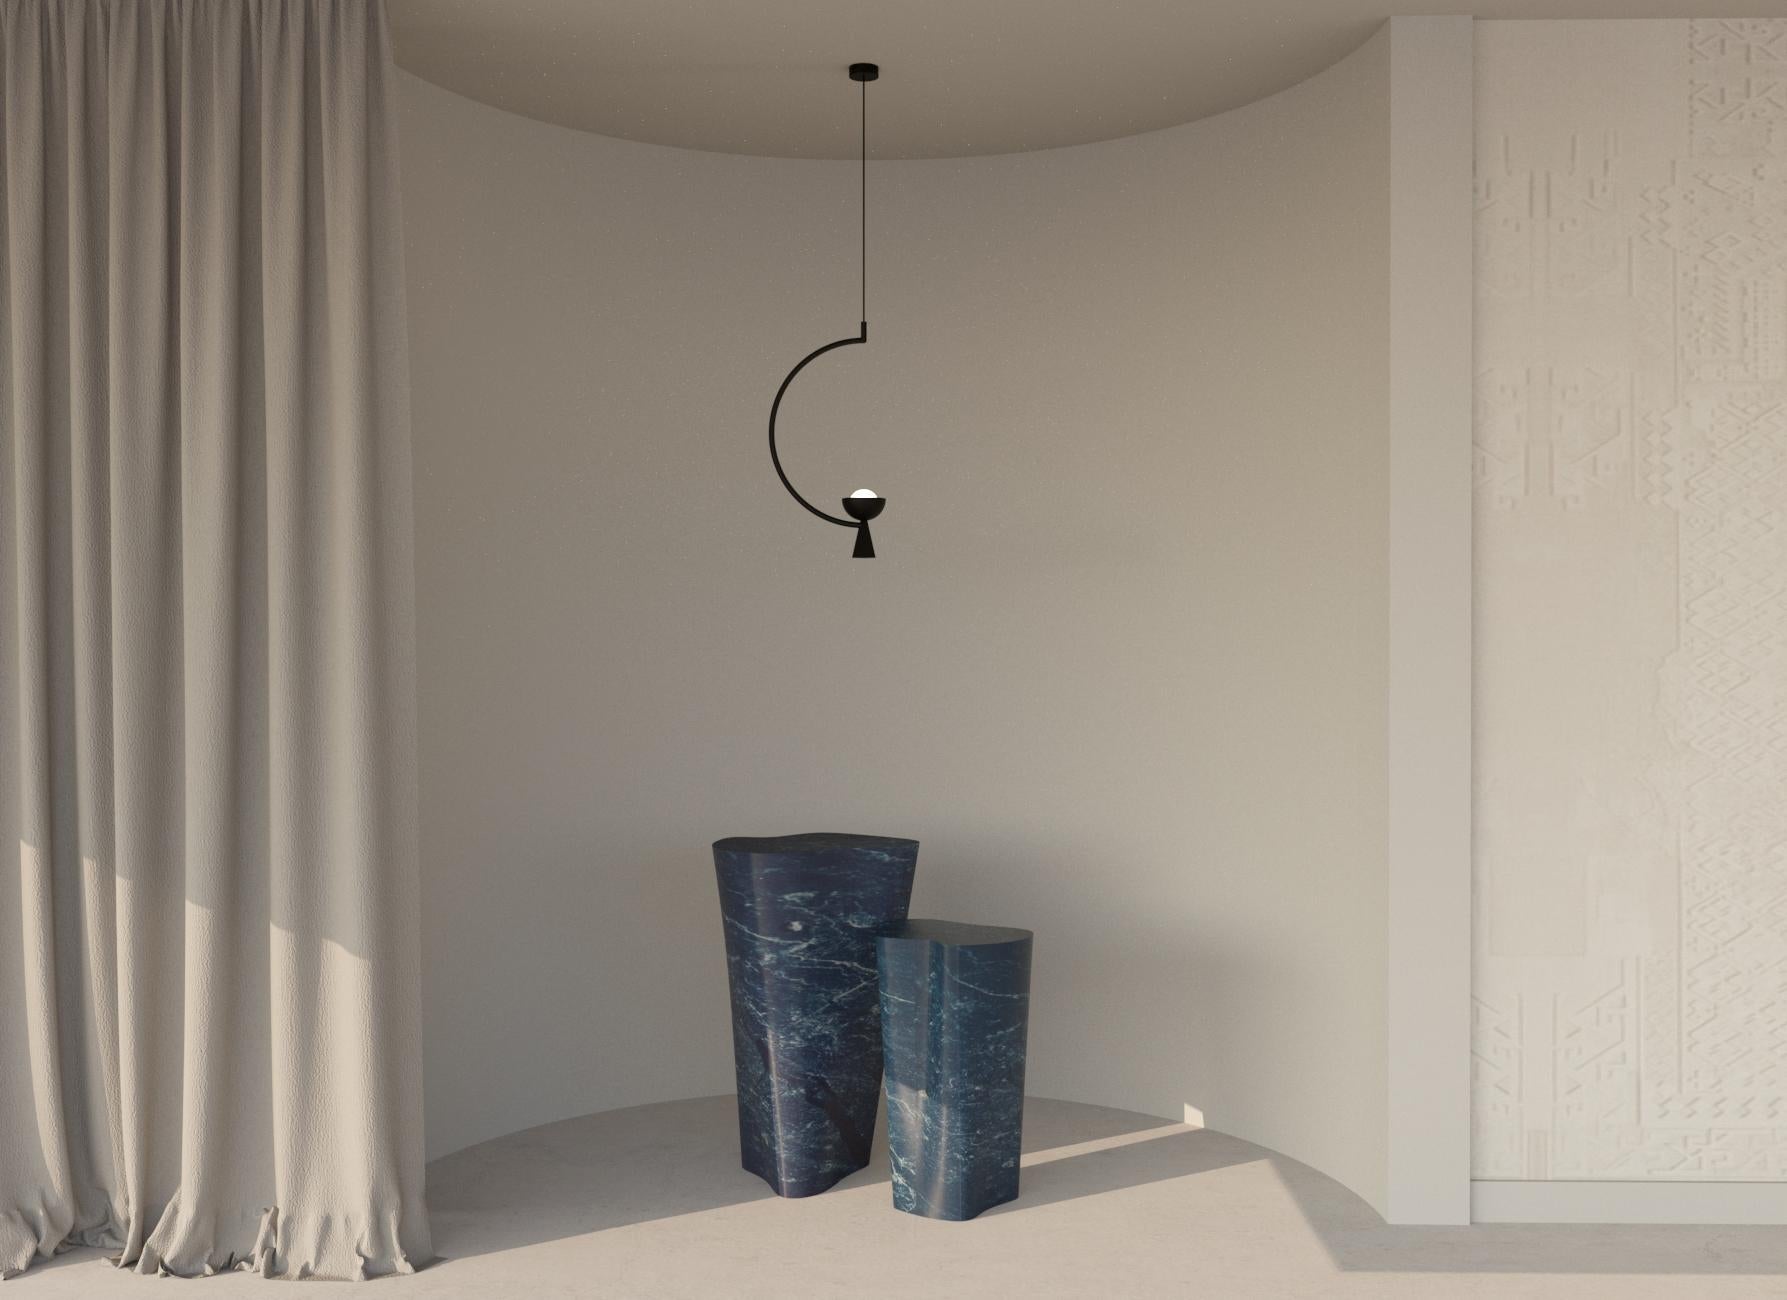 The Omen Light collection is a sculptural yet graphic collection using a distinctive chalice-like metallic shade as the main element.

The single pendant is a statement pendant that will add personality to any environement. The shade is suspended